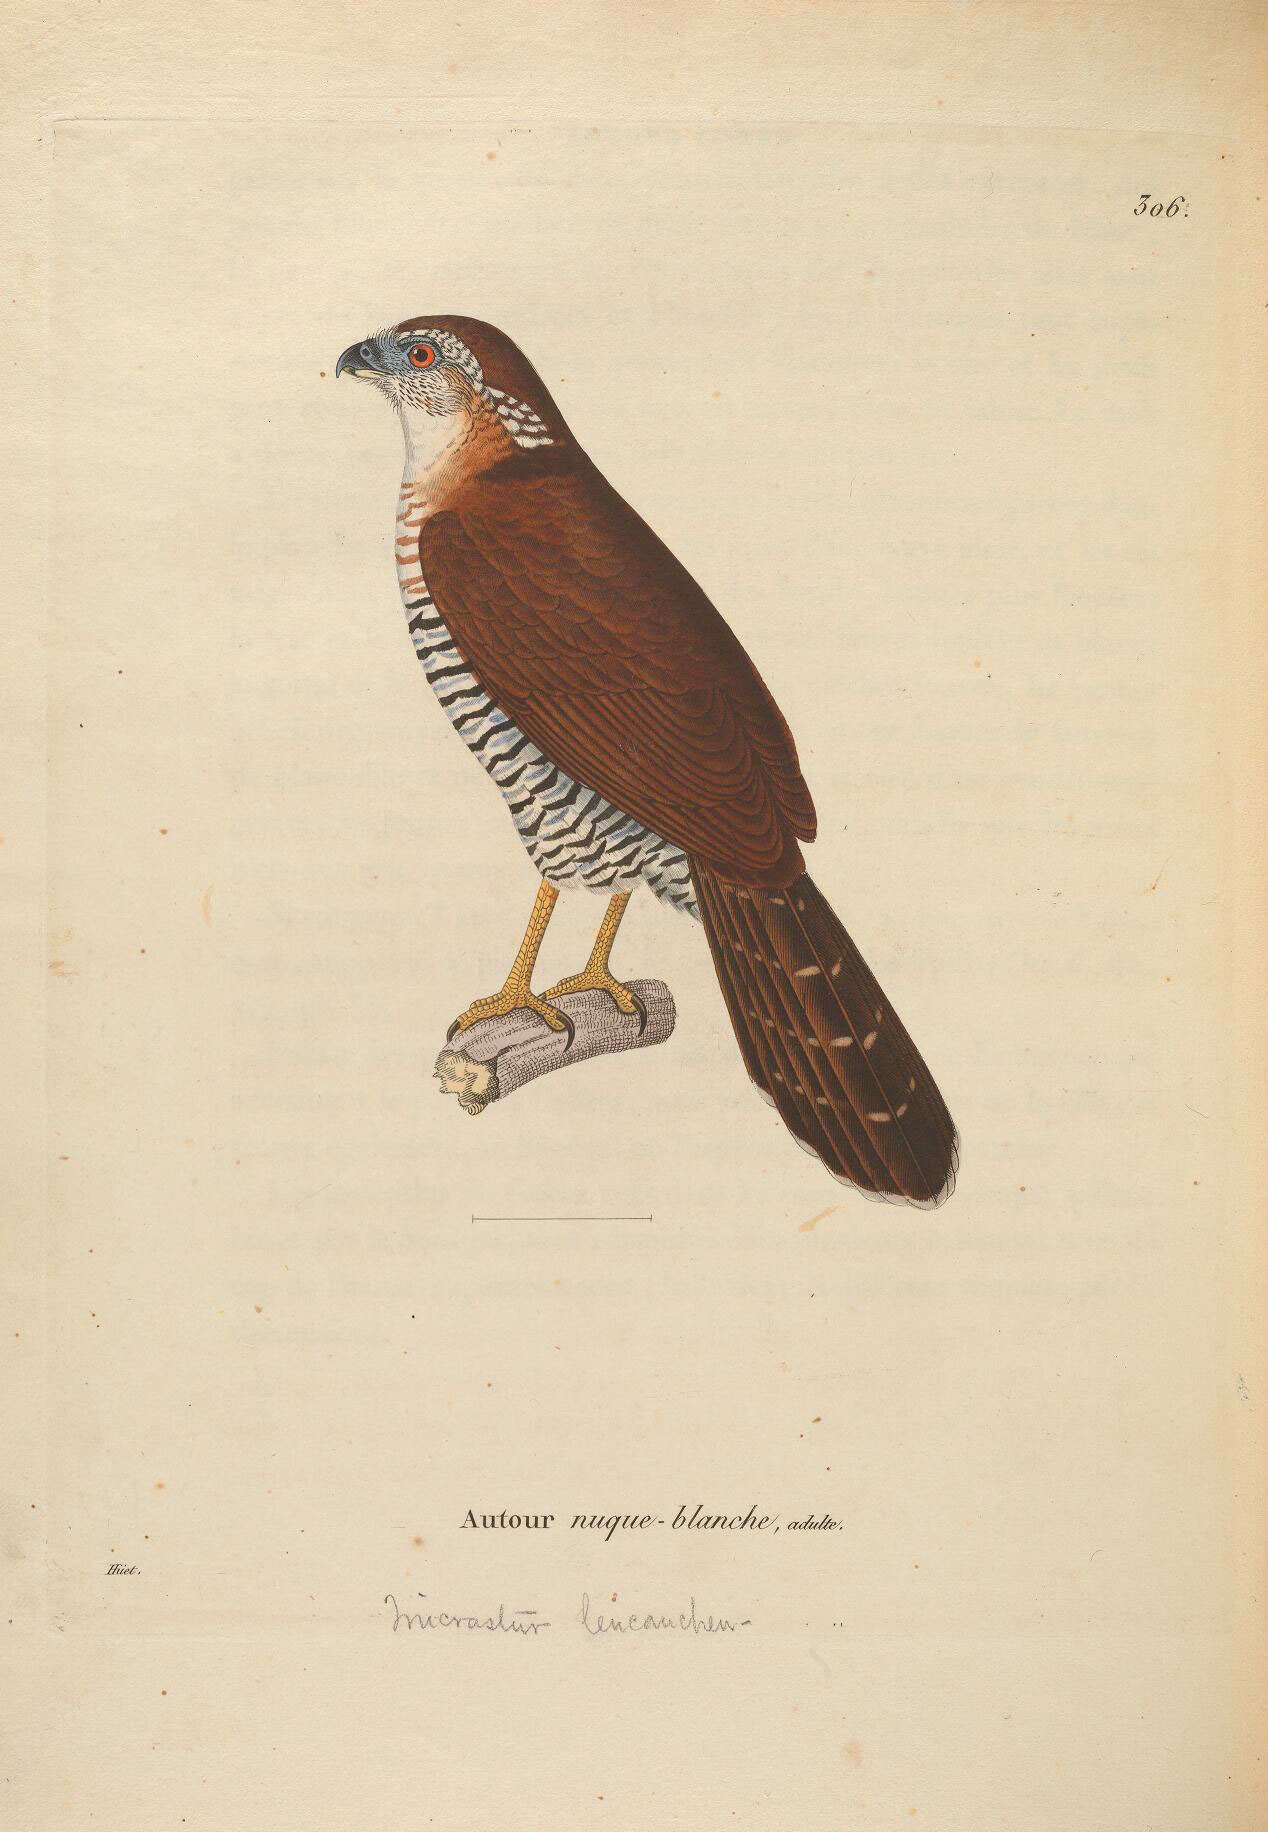 Image of White-throated Hawk